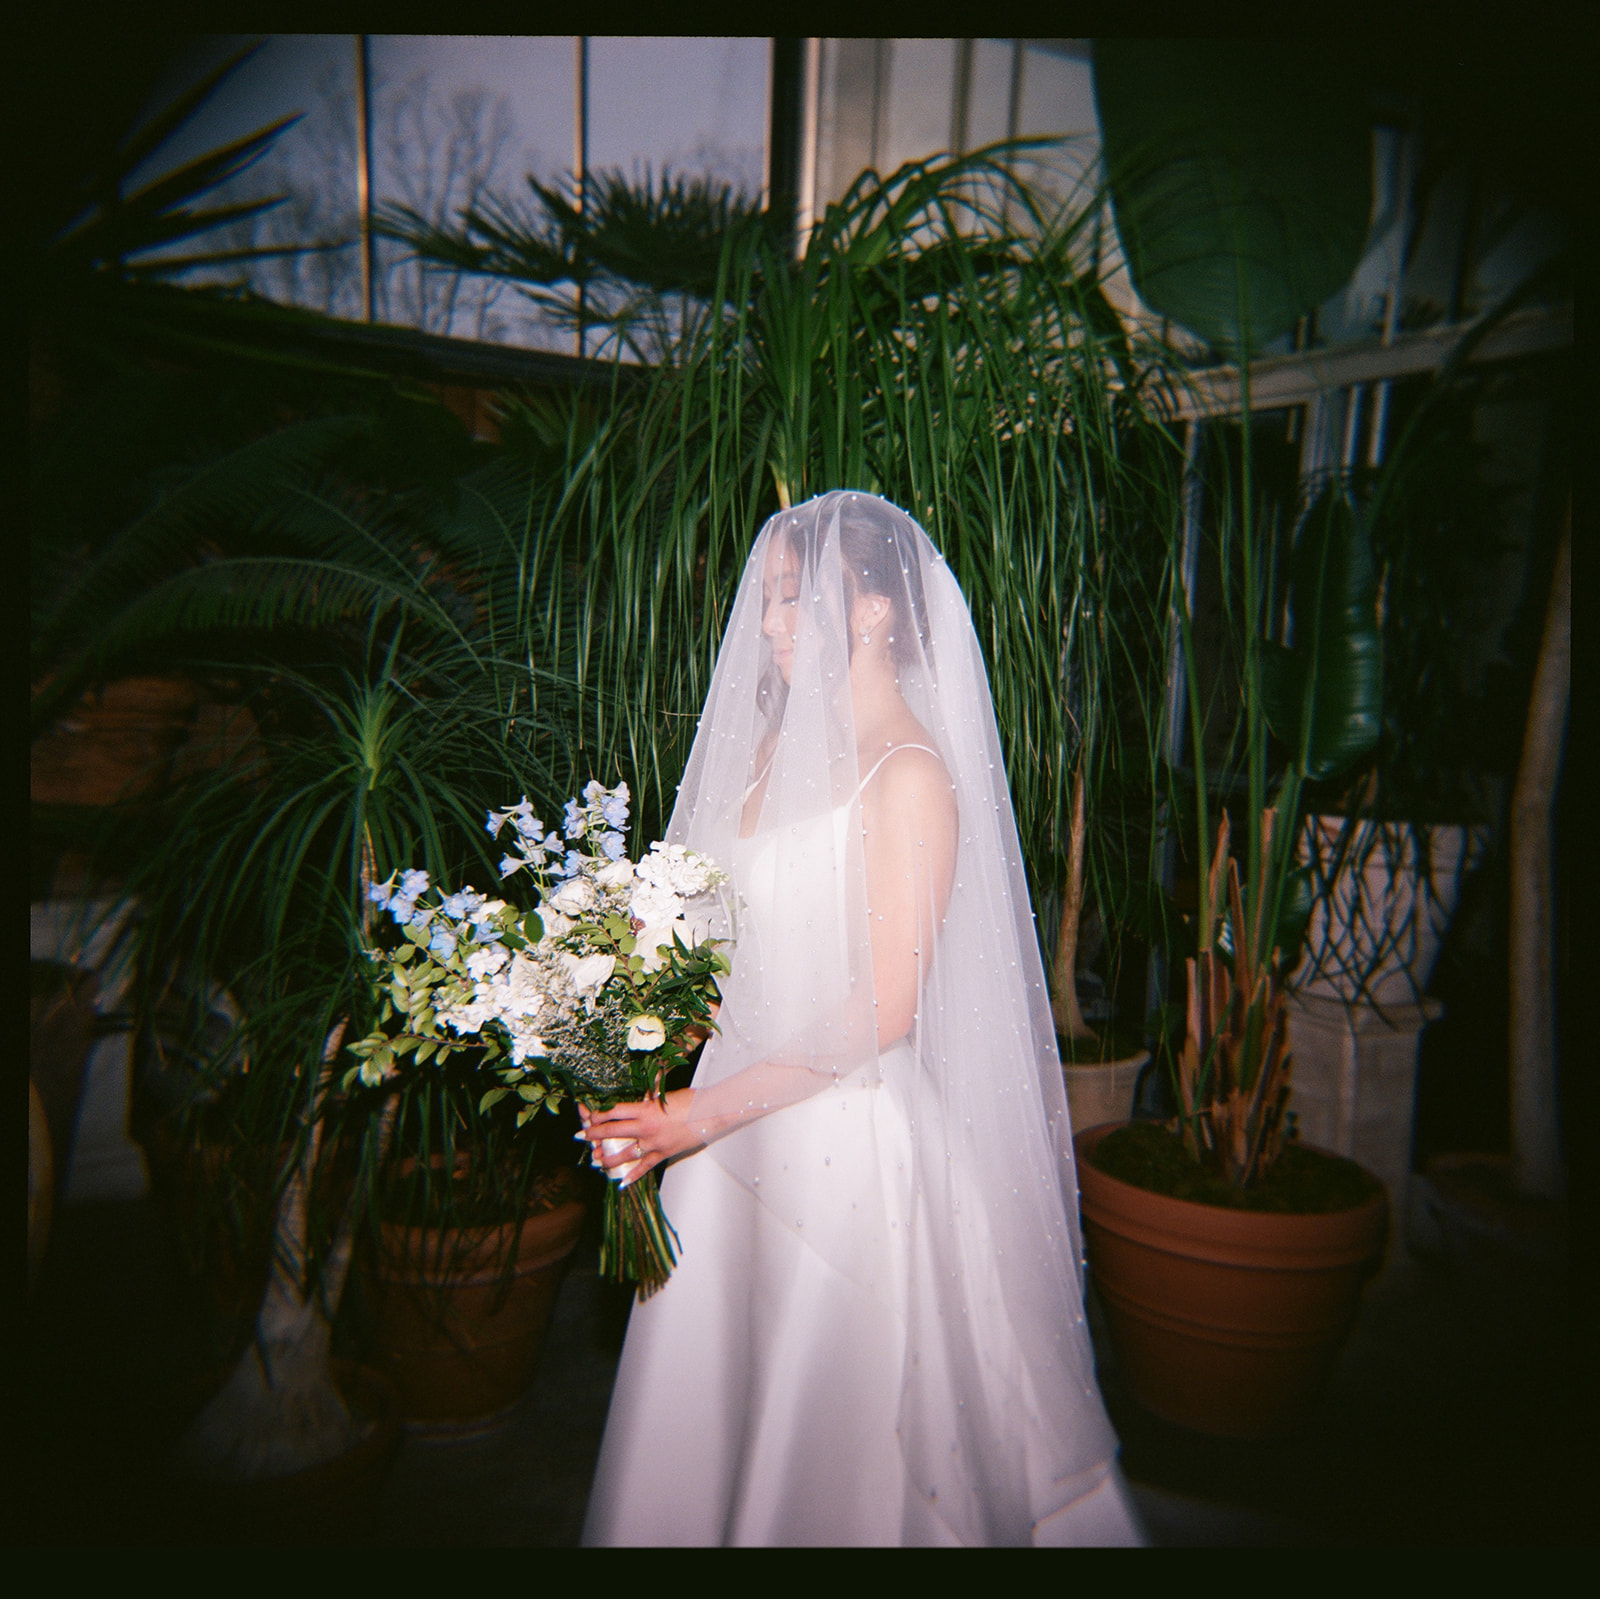 kodak portra 400 medium format film photo of the bride in the greenhouse with her veil over her head